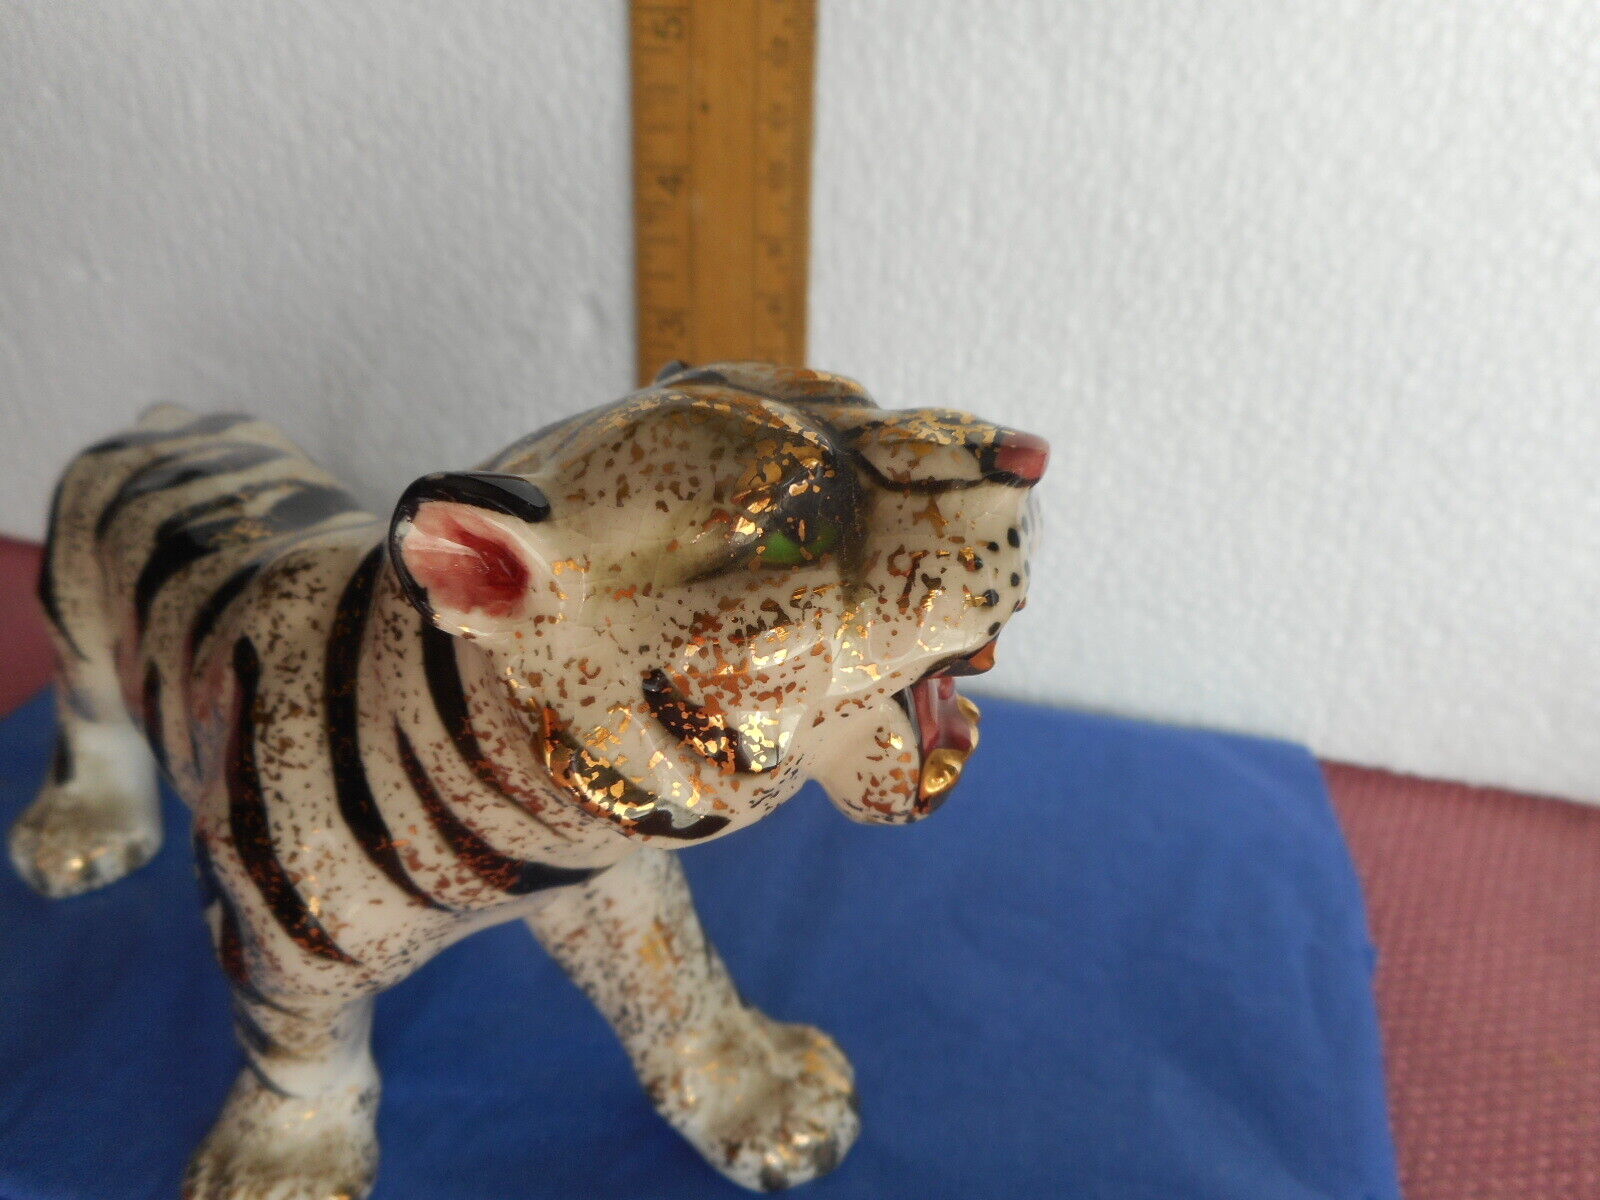 Antique pre WW2 Japan hand painted WHITE BENGAL tiger figurine W8743